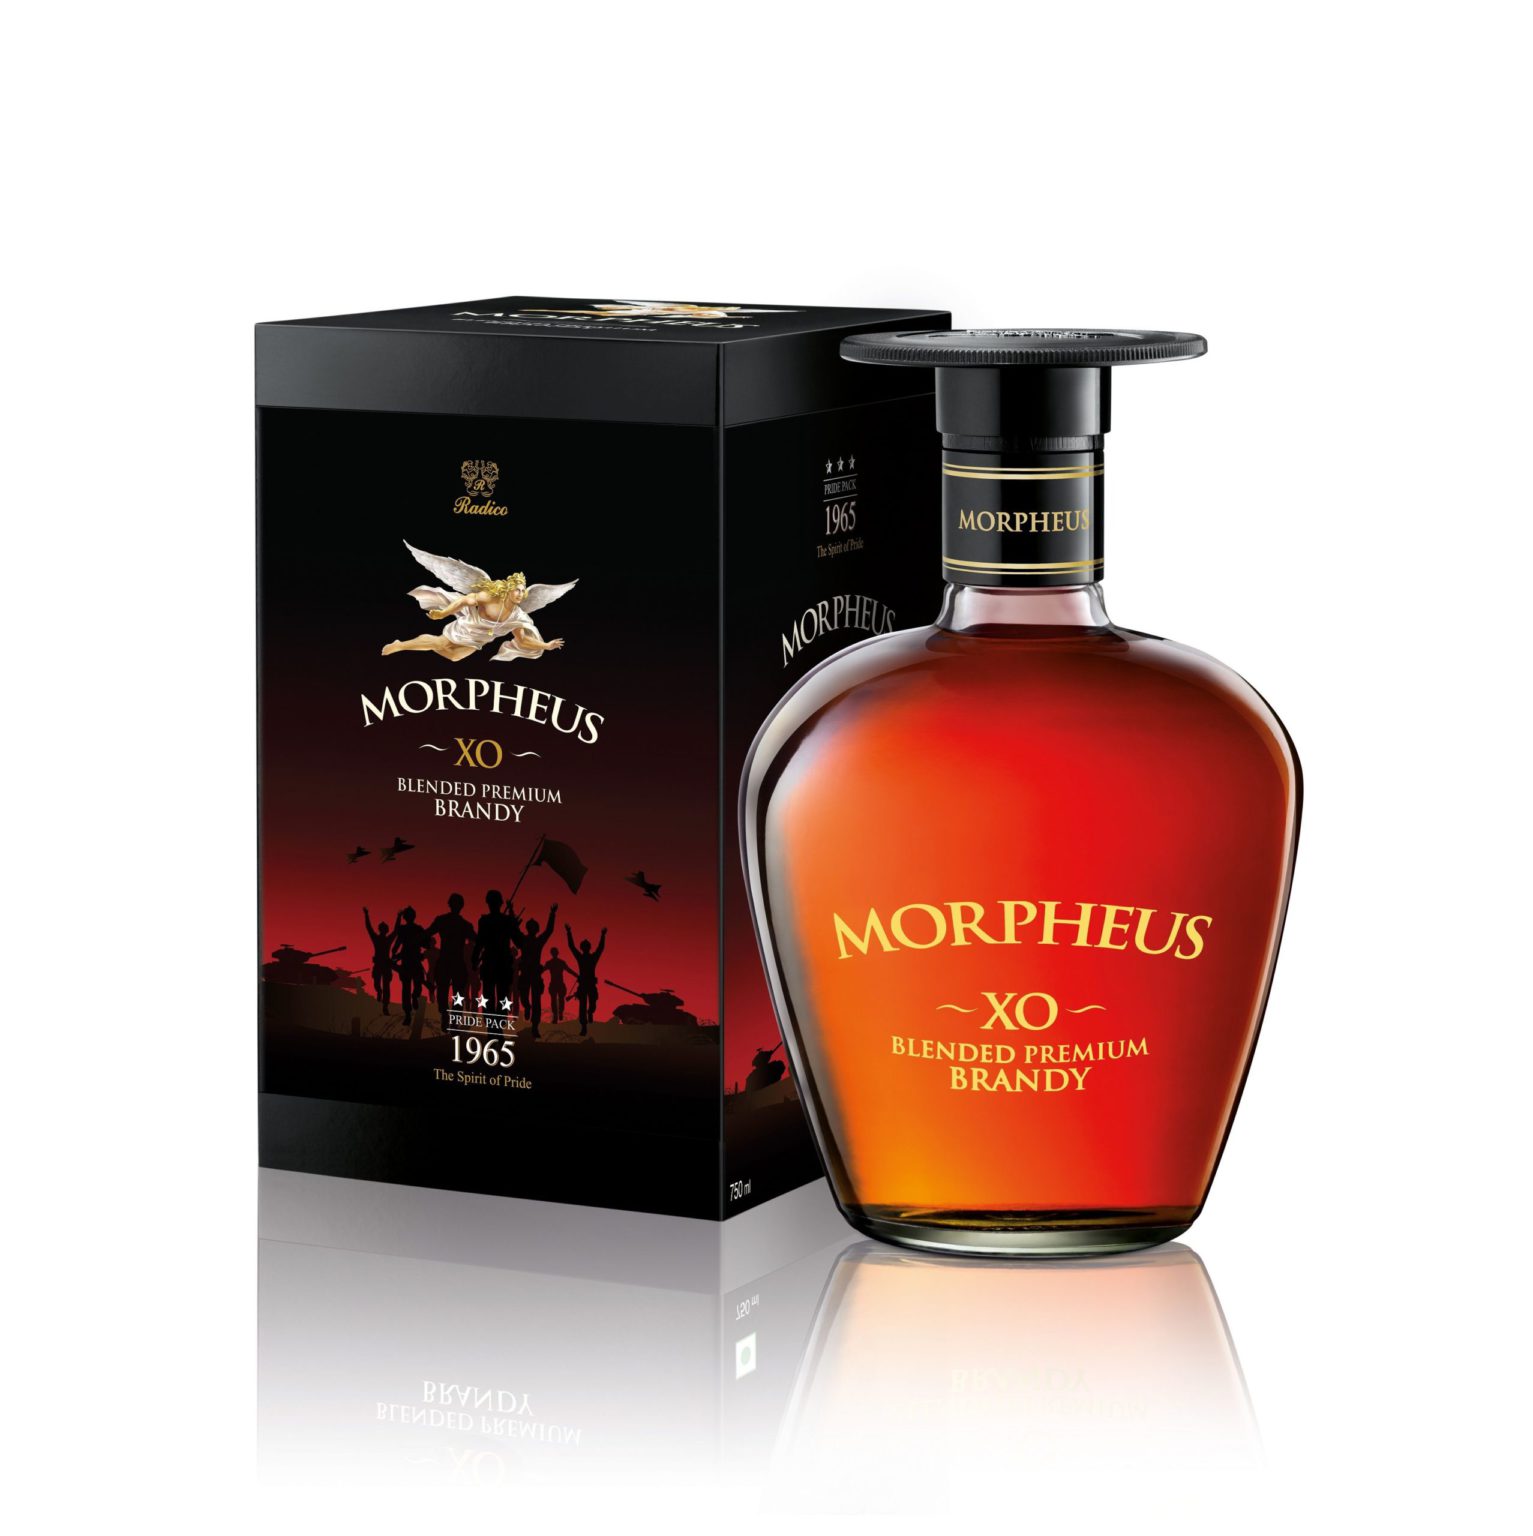 Best Brandy Brands In India Morpheus Scaled 1 1533x1536 